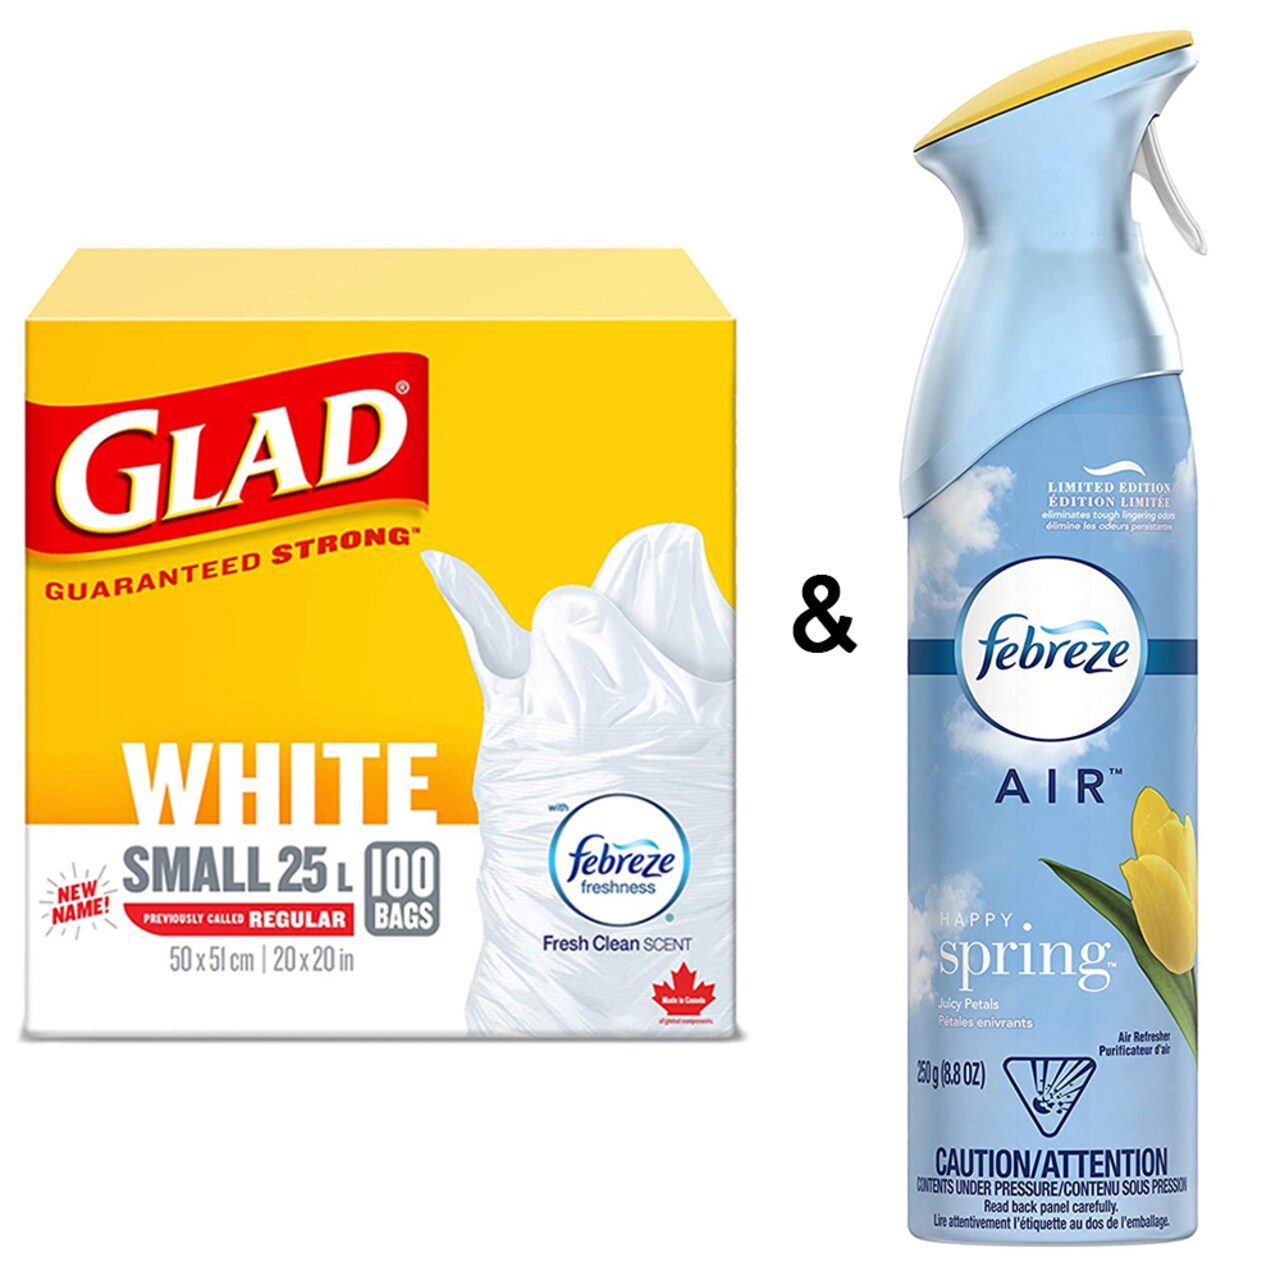 Febreze Glad White Garbage Bags - Small 25 Litres - Fresh Clean